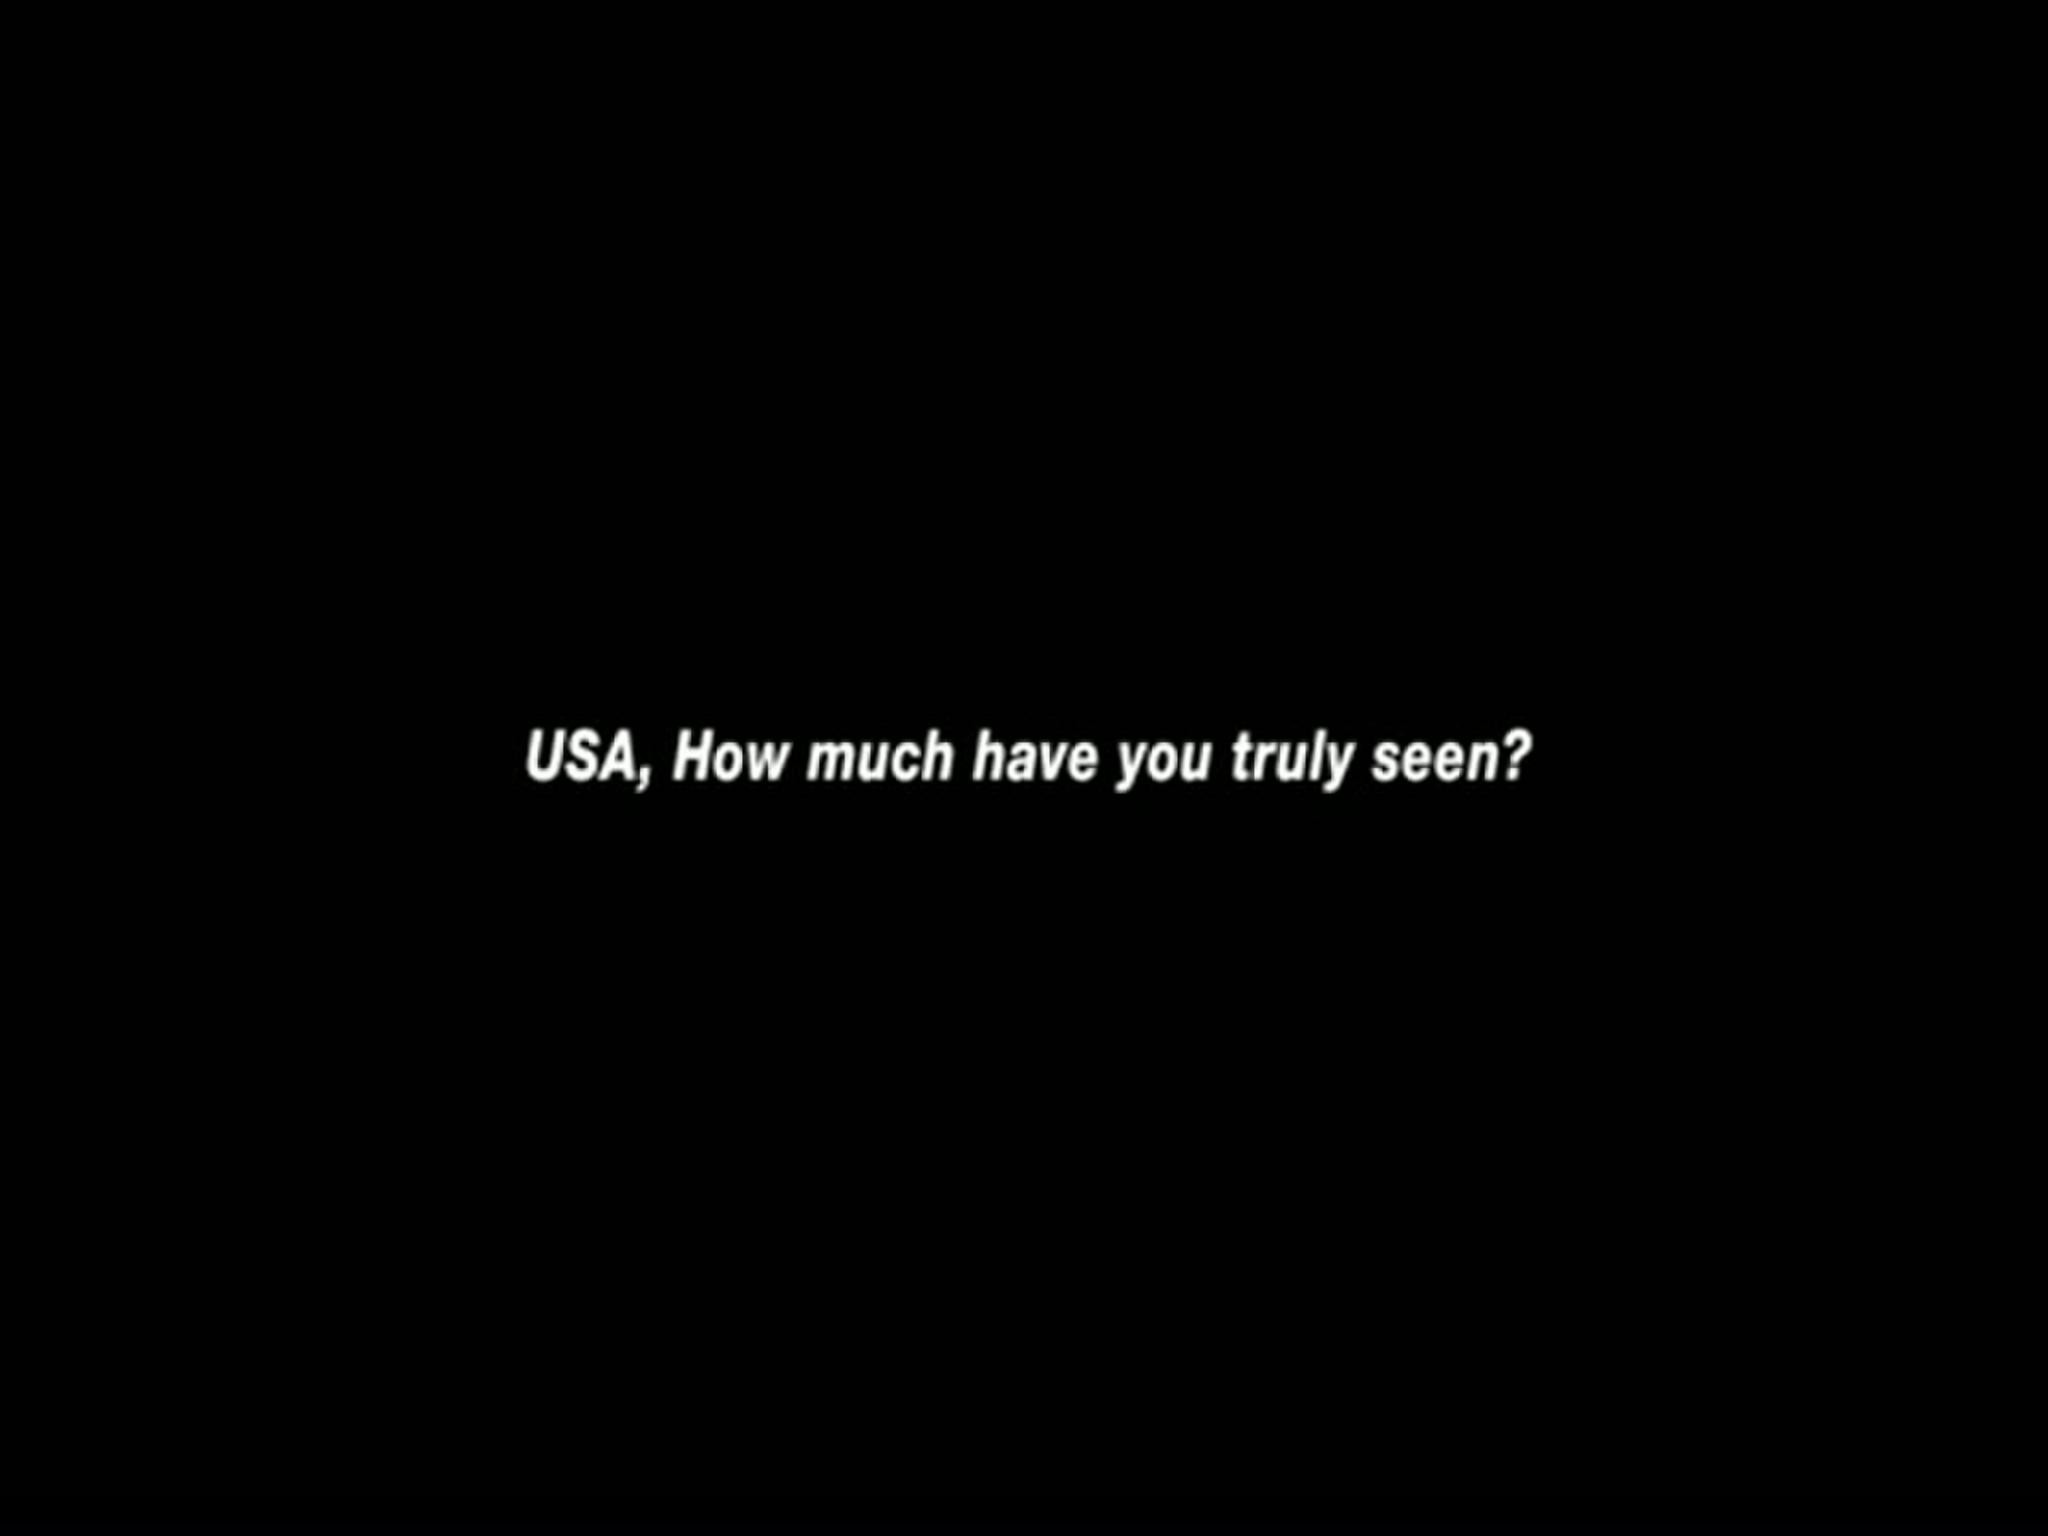 USA. HOW MUCH HAVE YOU TRULY SEEN?